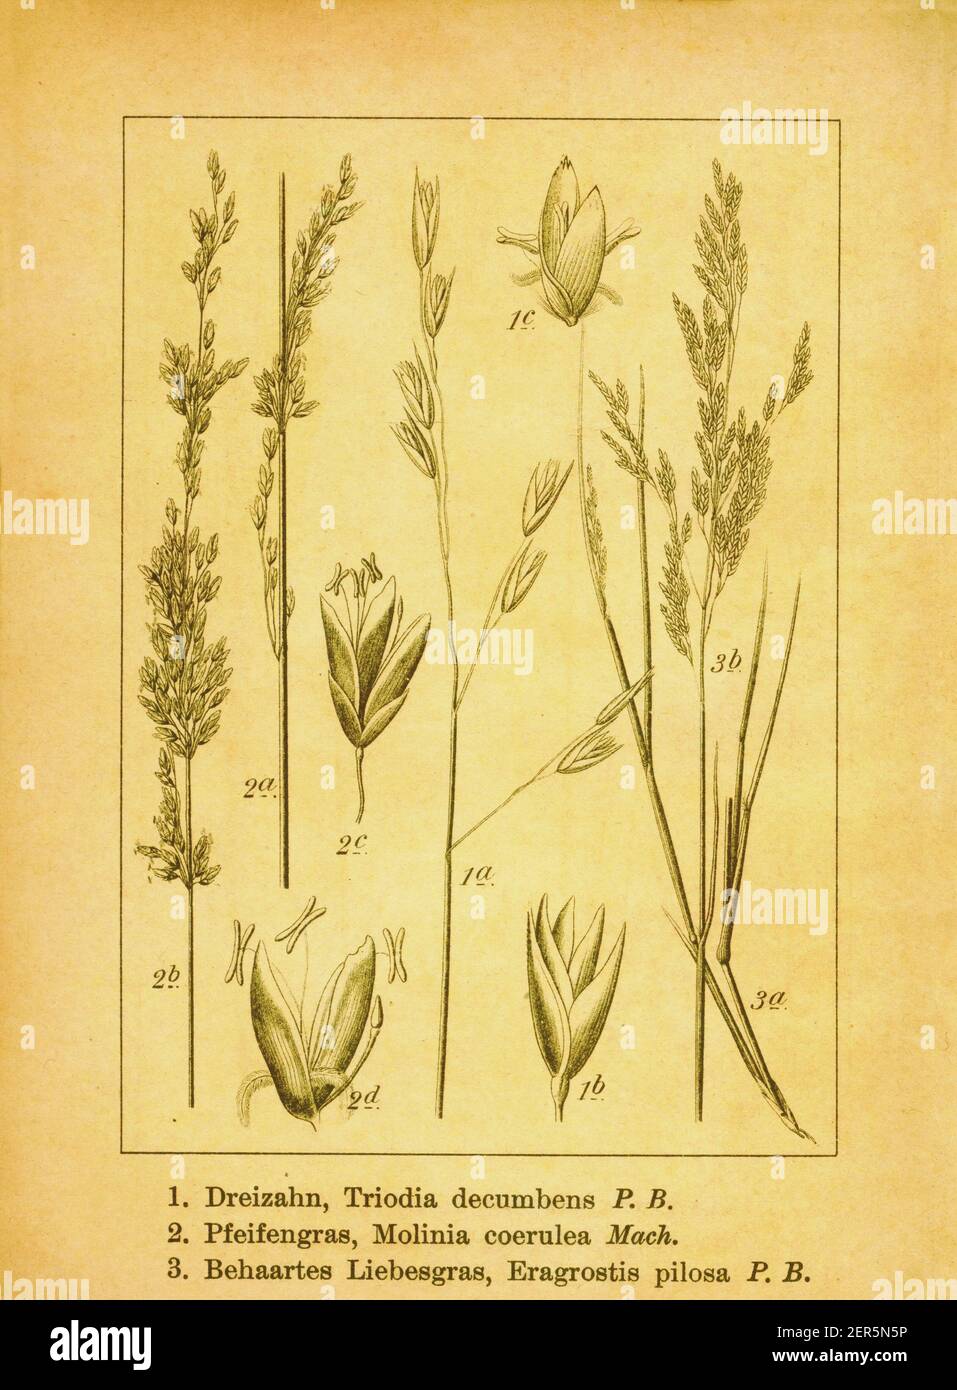 19th-century engraving of spinifex, purple moor grass and soft lovegrass. Illustration by Jacob Sturm (1771-1848) from the book Deutschlands Flora in Stock Photo